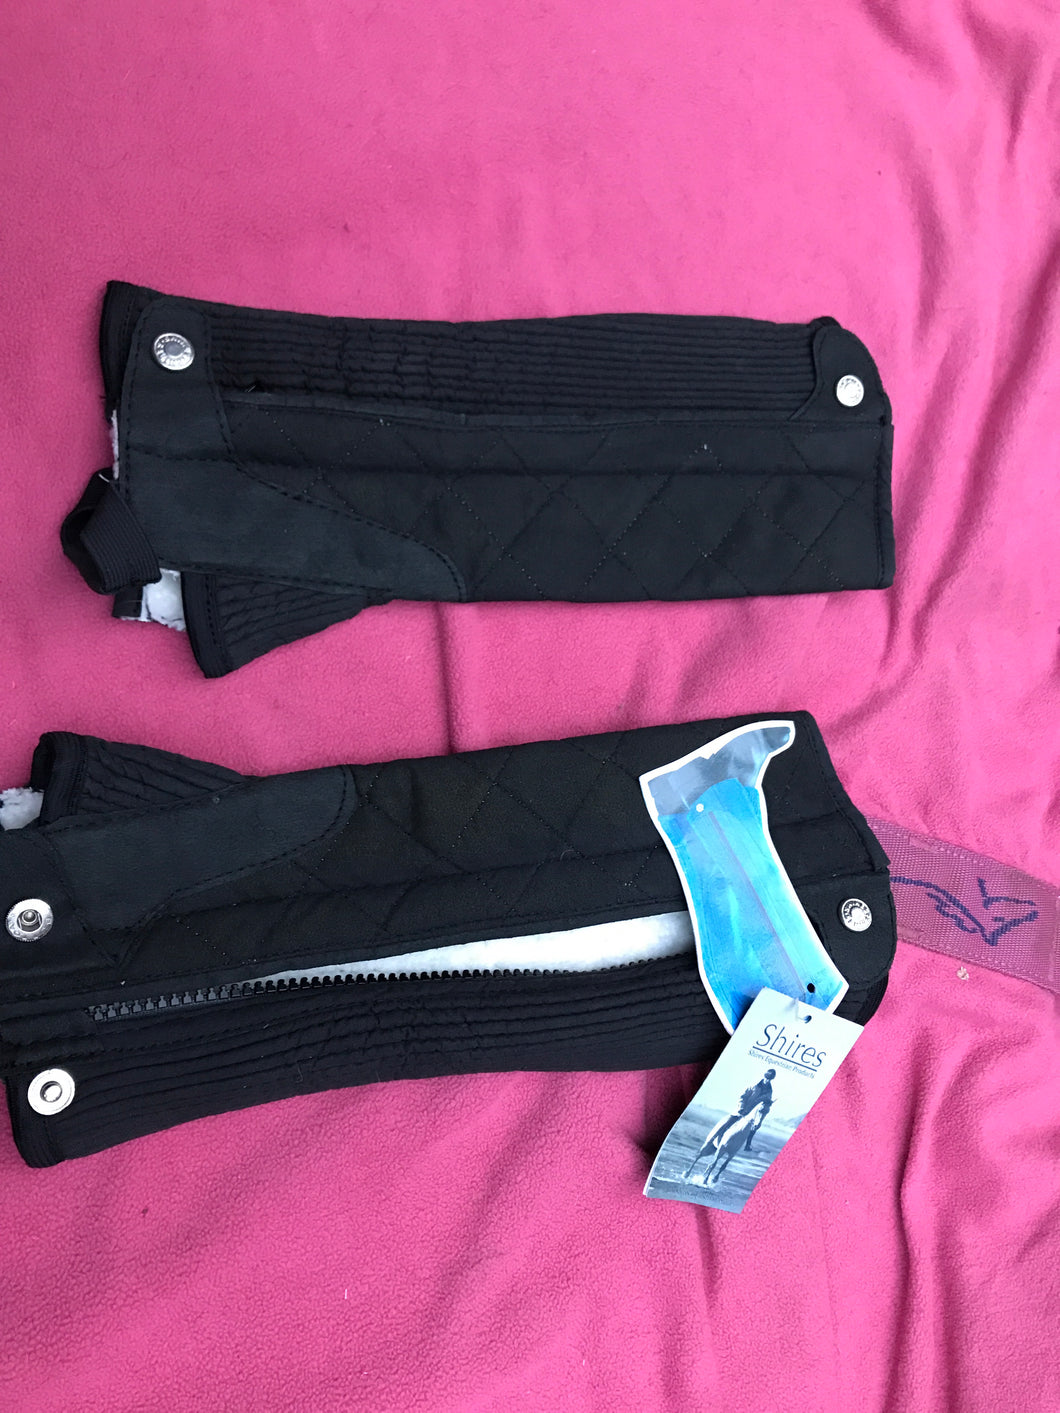 New Thermal fleece lined chaps Childs Med ;6-8 years ) FREE POSTAGE